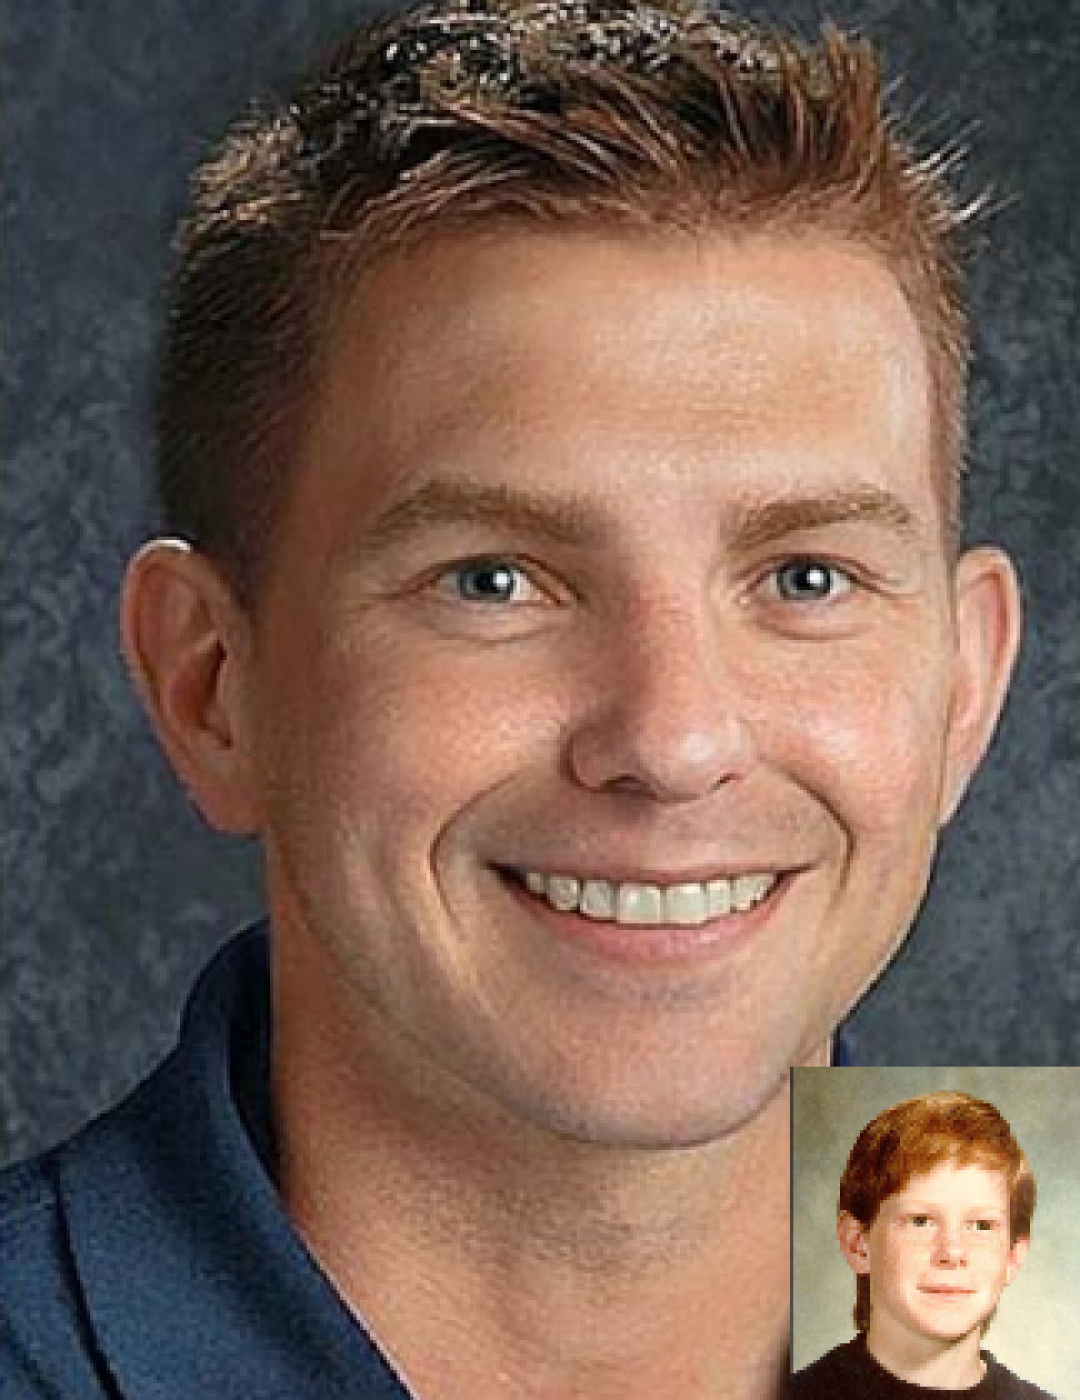 Mark Himebaugh. Missing boy with red hair and blue eyes. Age progressed photo shows what Mark looks like at 34 years old: adult man with short red hair and blue eyes.